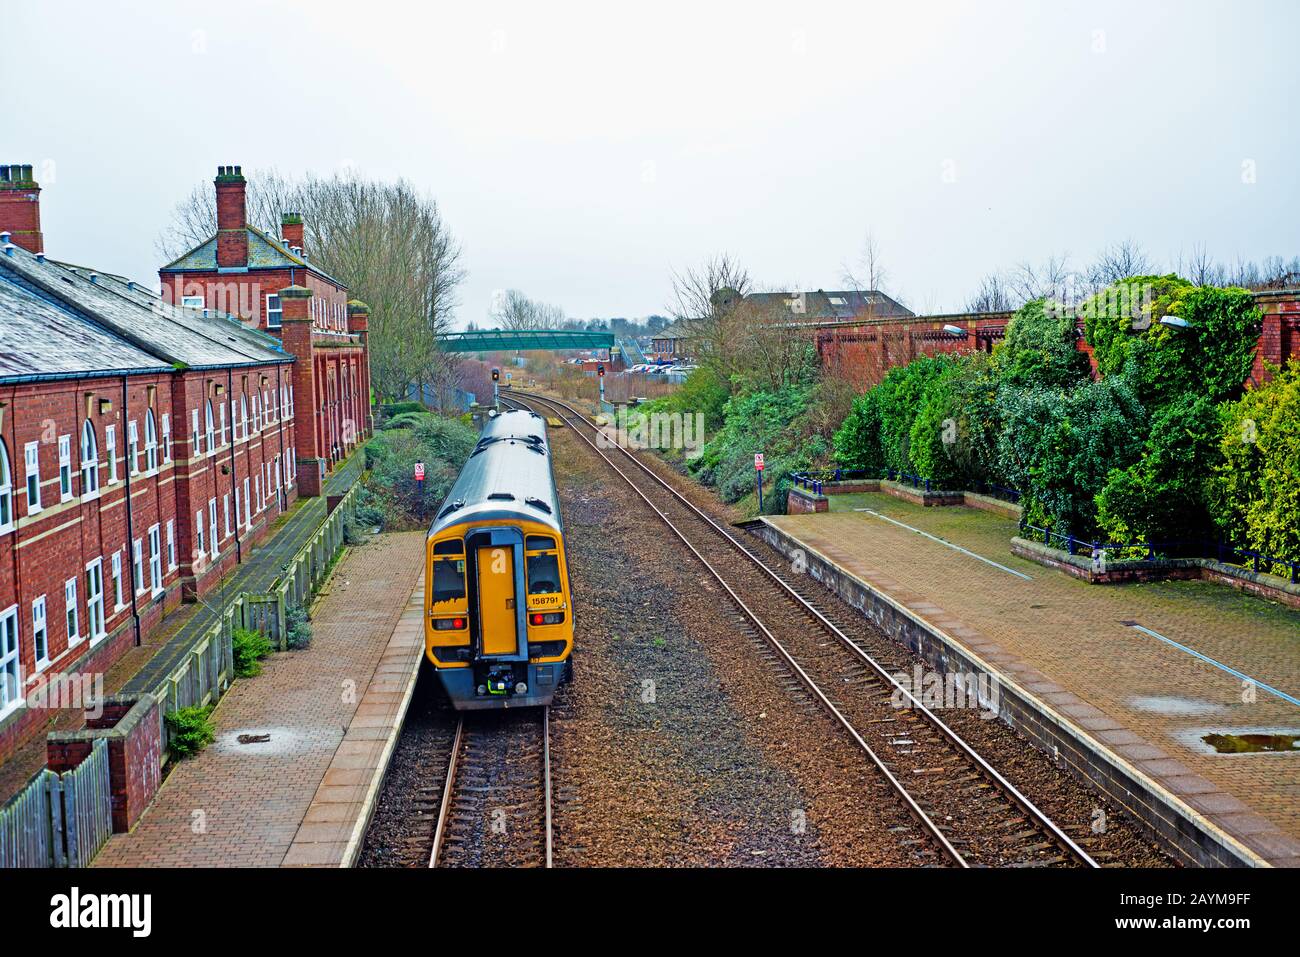 Class 158 Train at Stockton on Tees Station, Cleveland, England Stock Photo